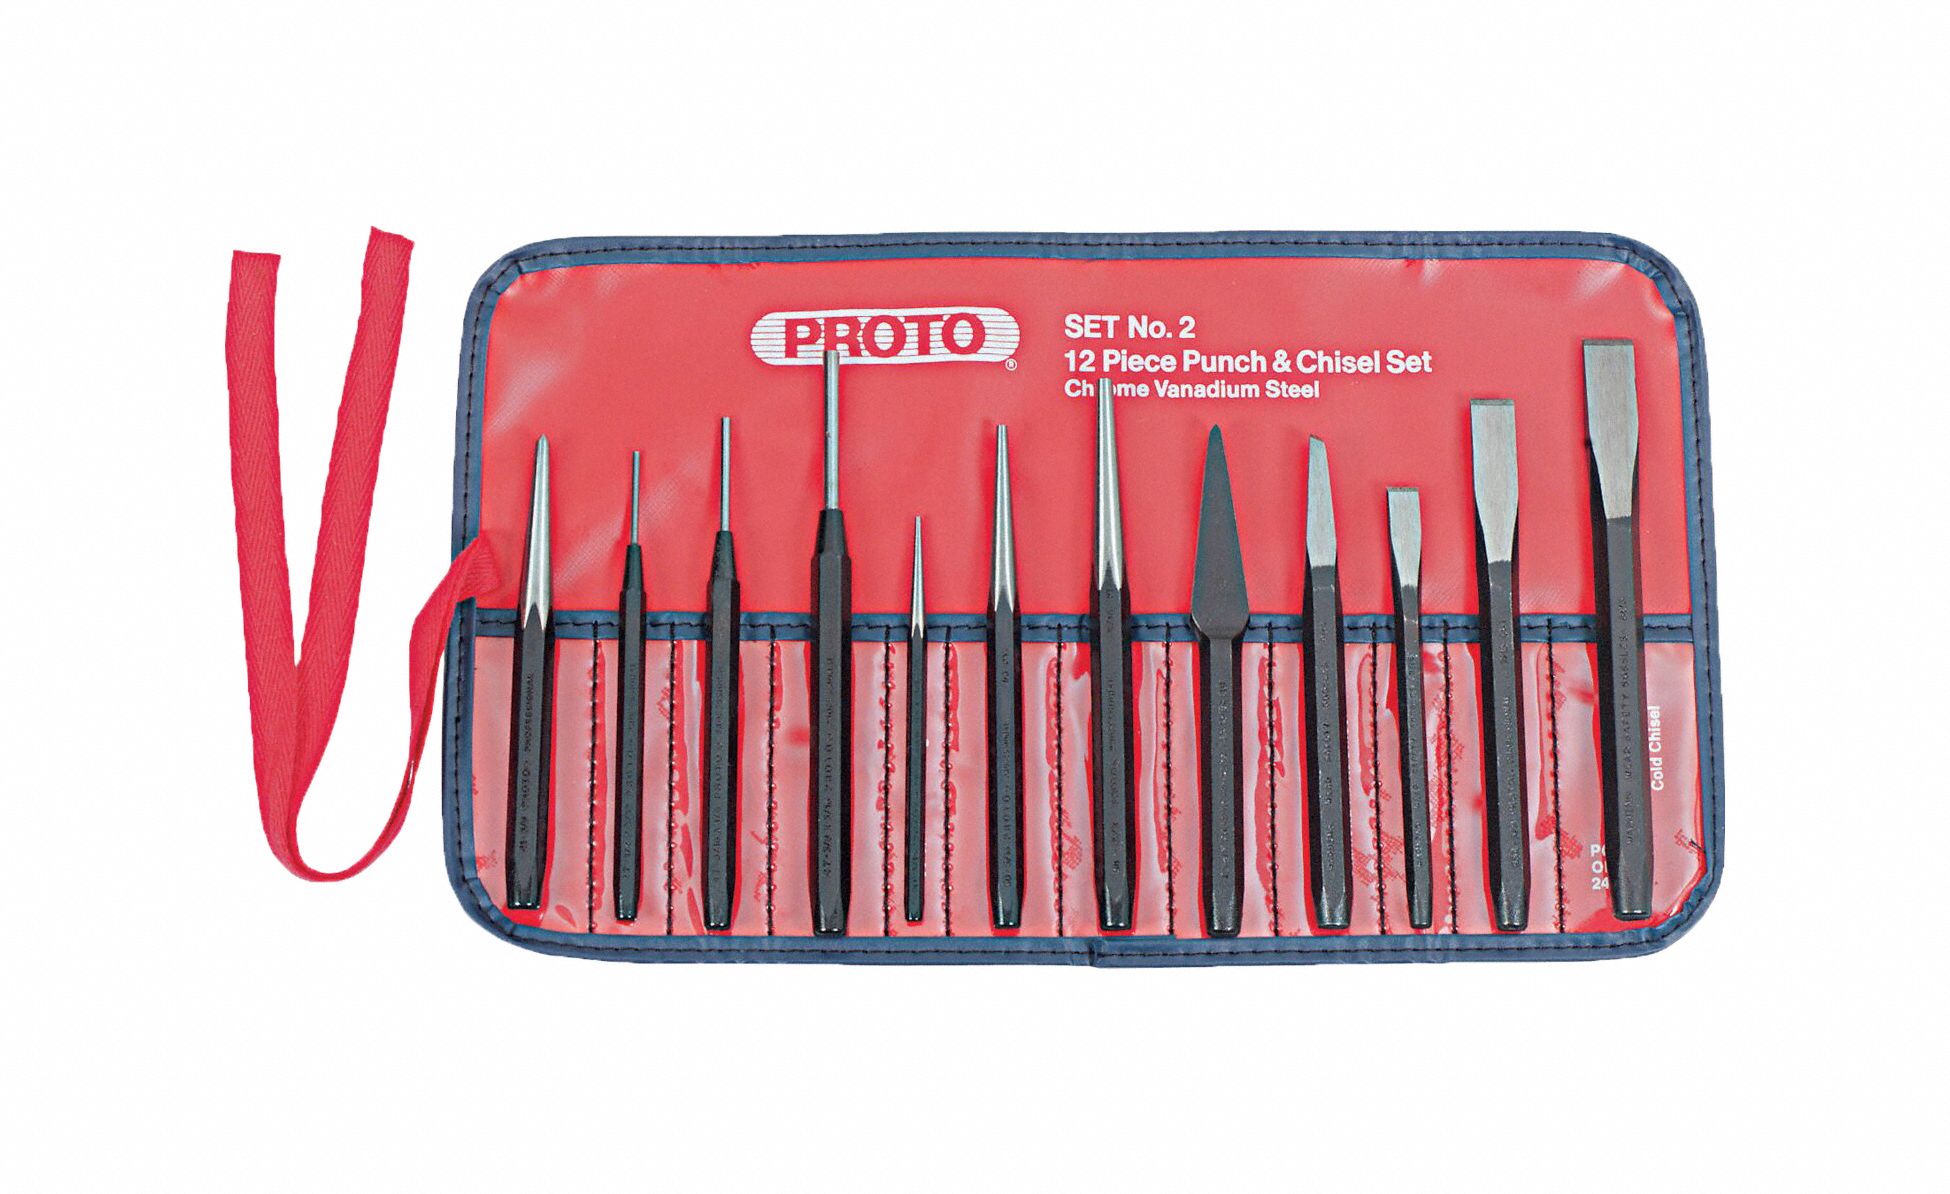 Grizzly H7923 12pc Chisel Set in Wooden Box